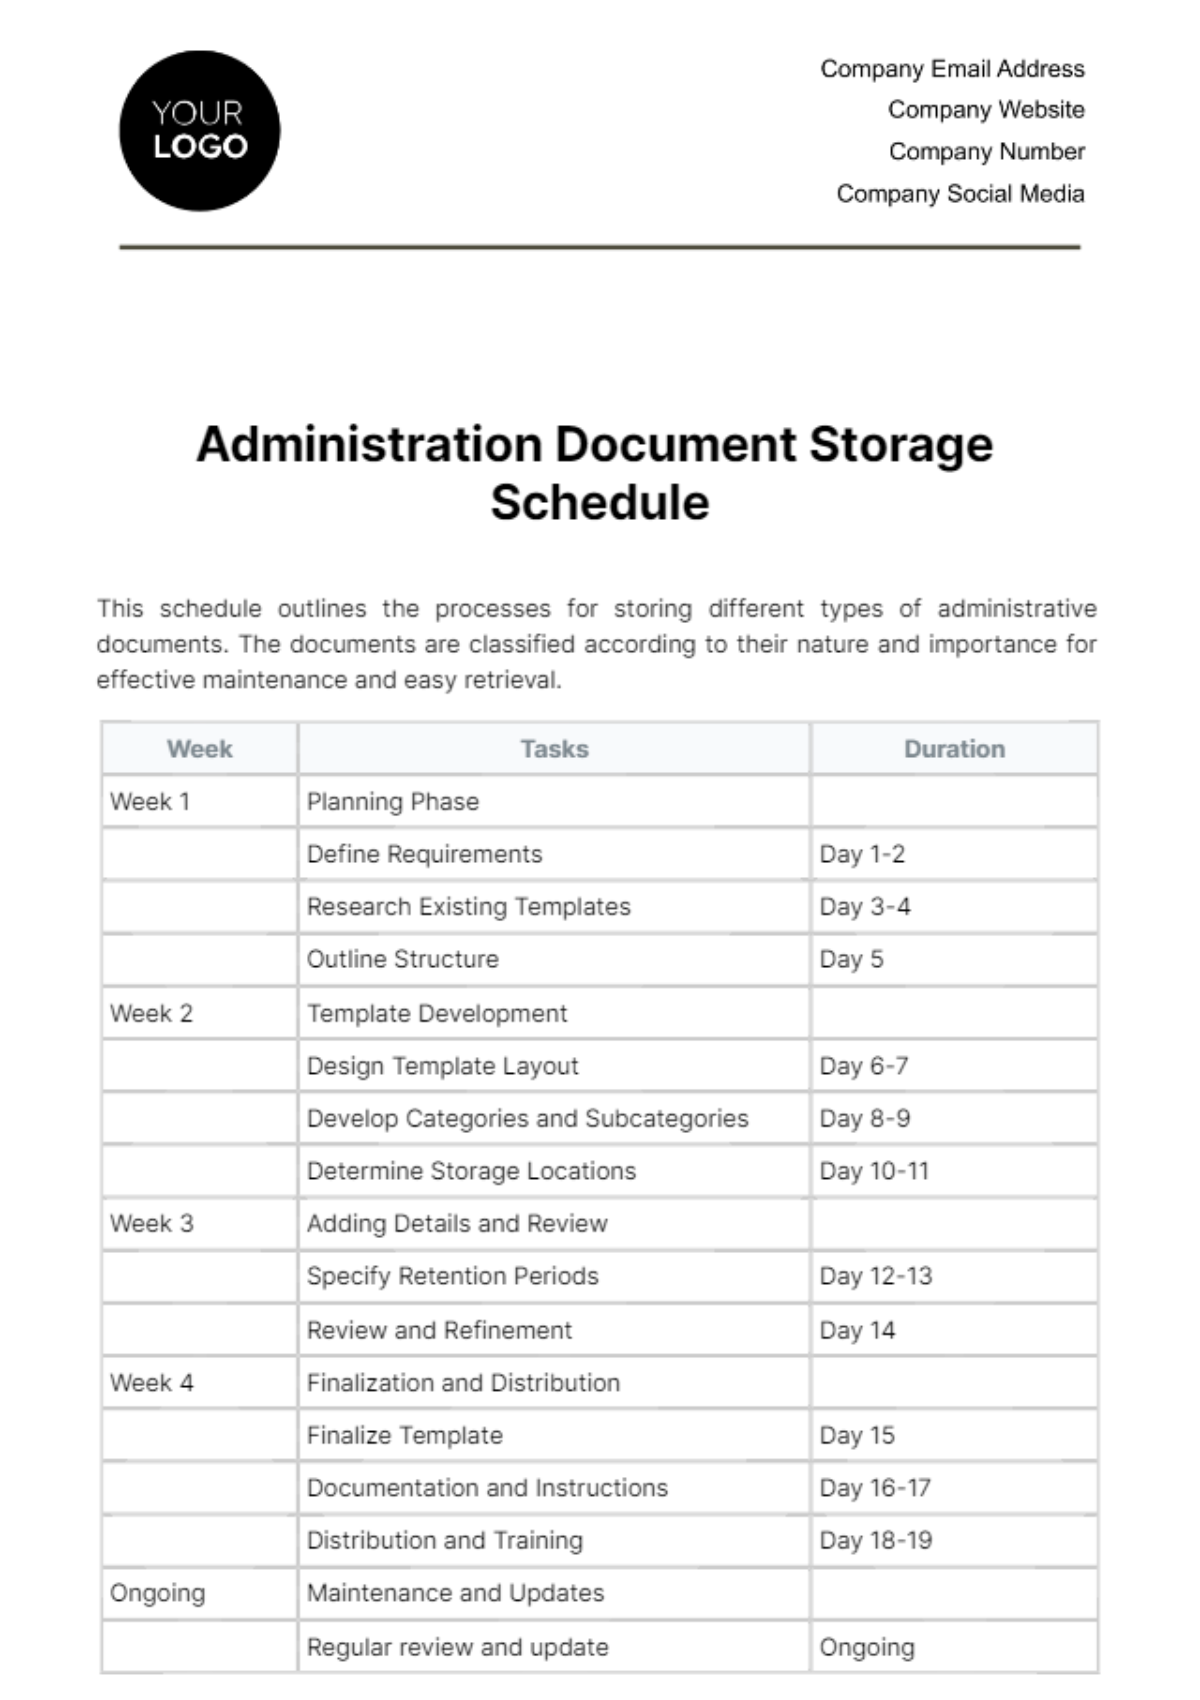 Free Administration Document Storage Schedule Template